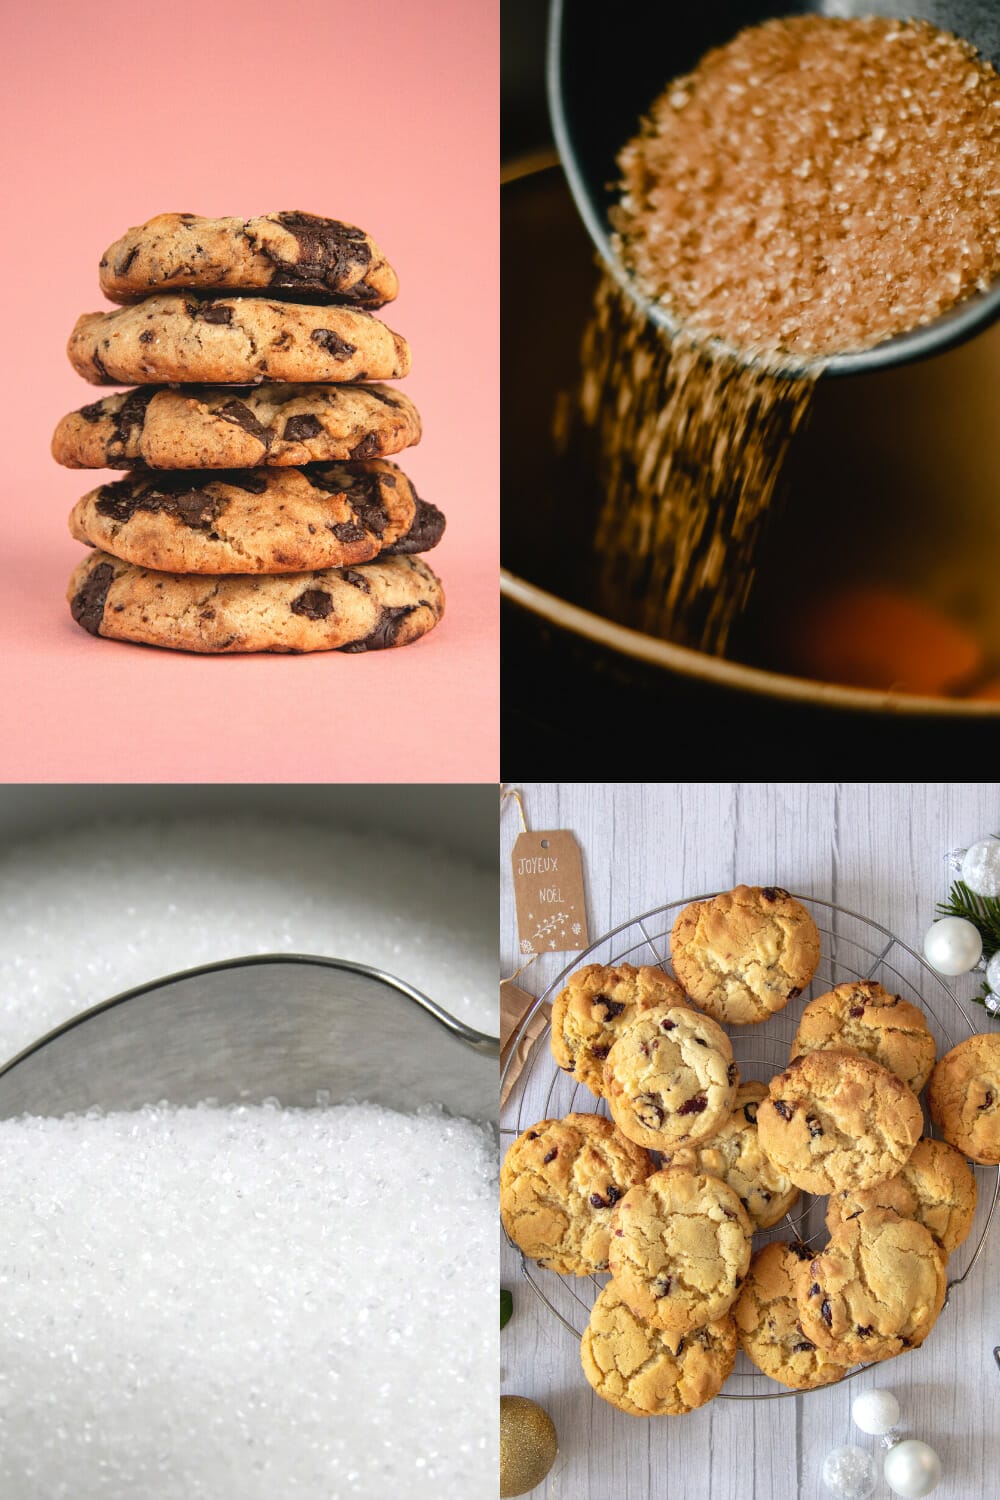 Help! Out of brown sugar: can you make cookies without brown sugar? via @nofusskitchen